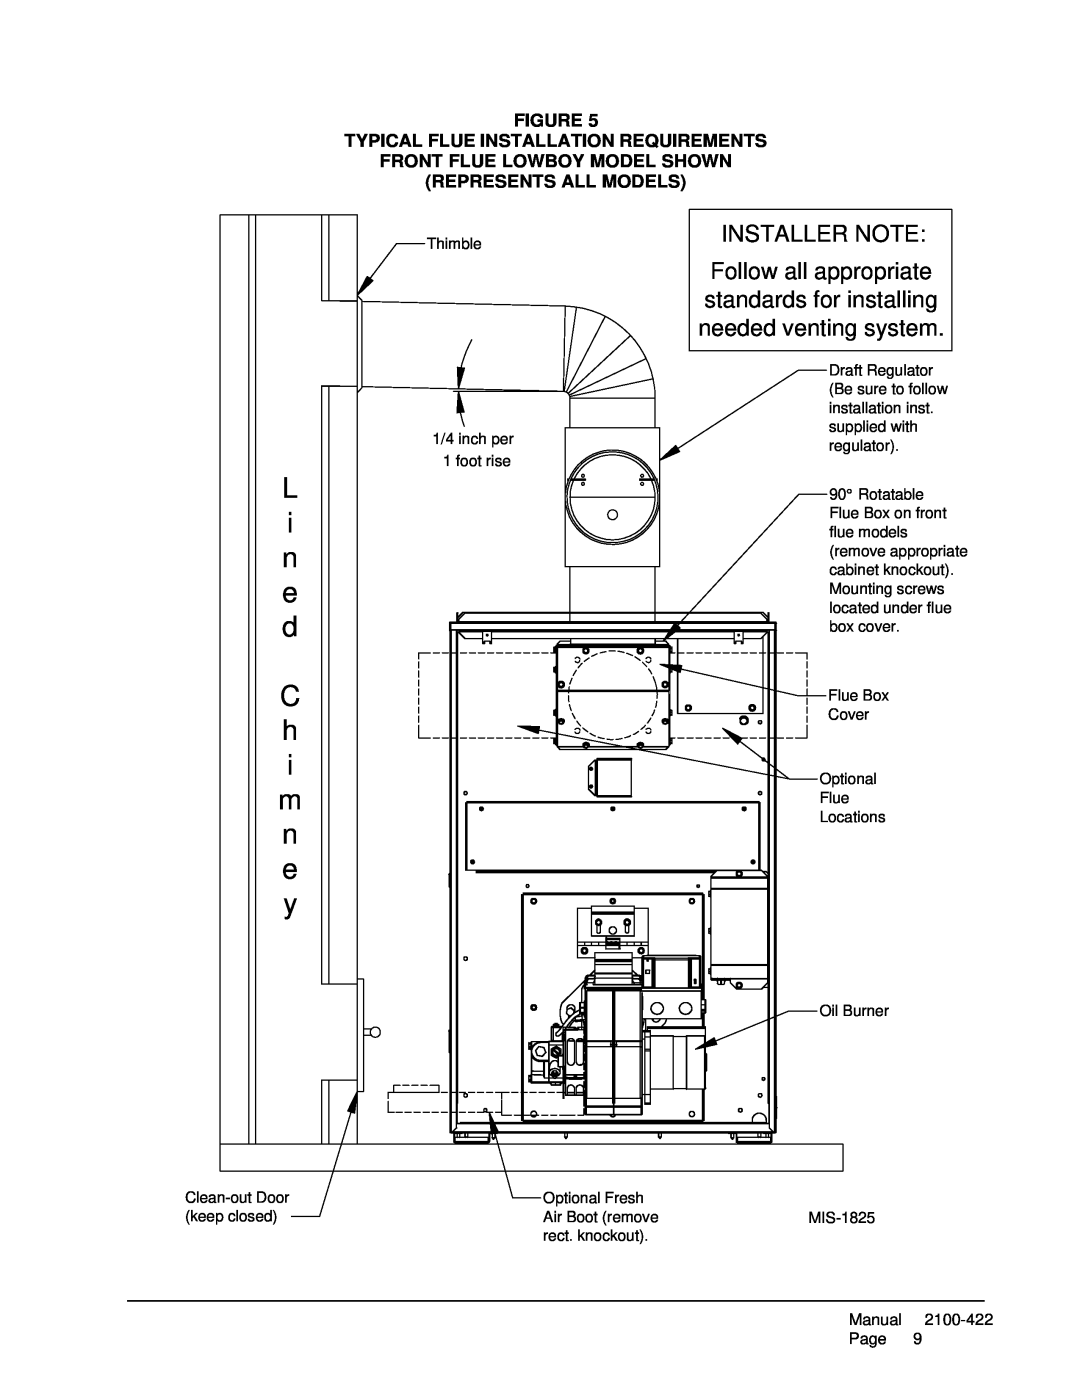 321 Studios FLF110D48E Installer Note, Follow all appropriate, standards for installing, needed venting system, L i n e d 